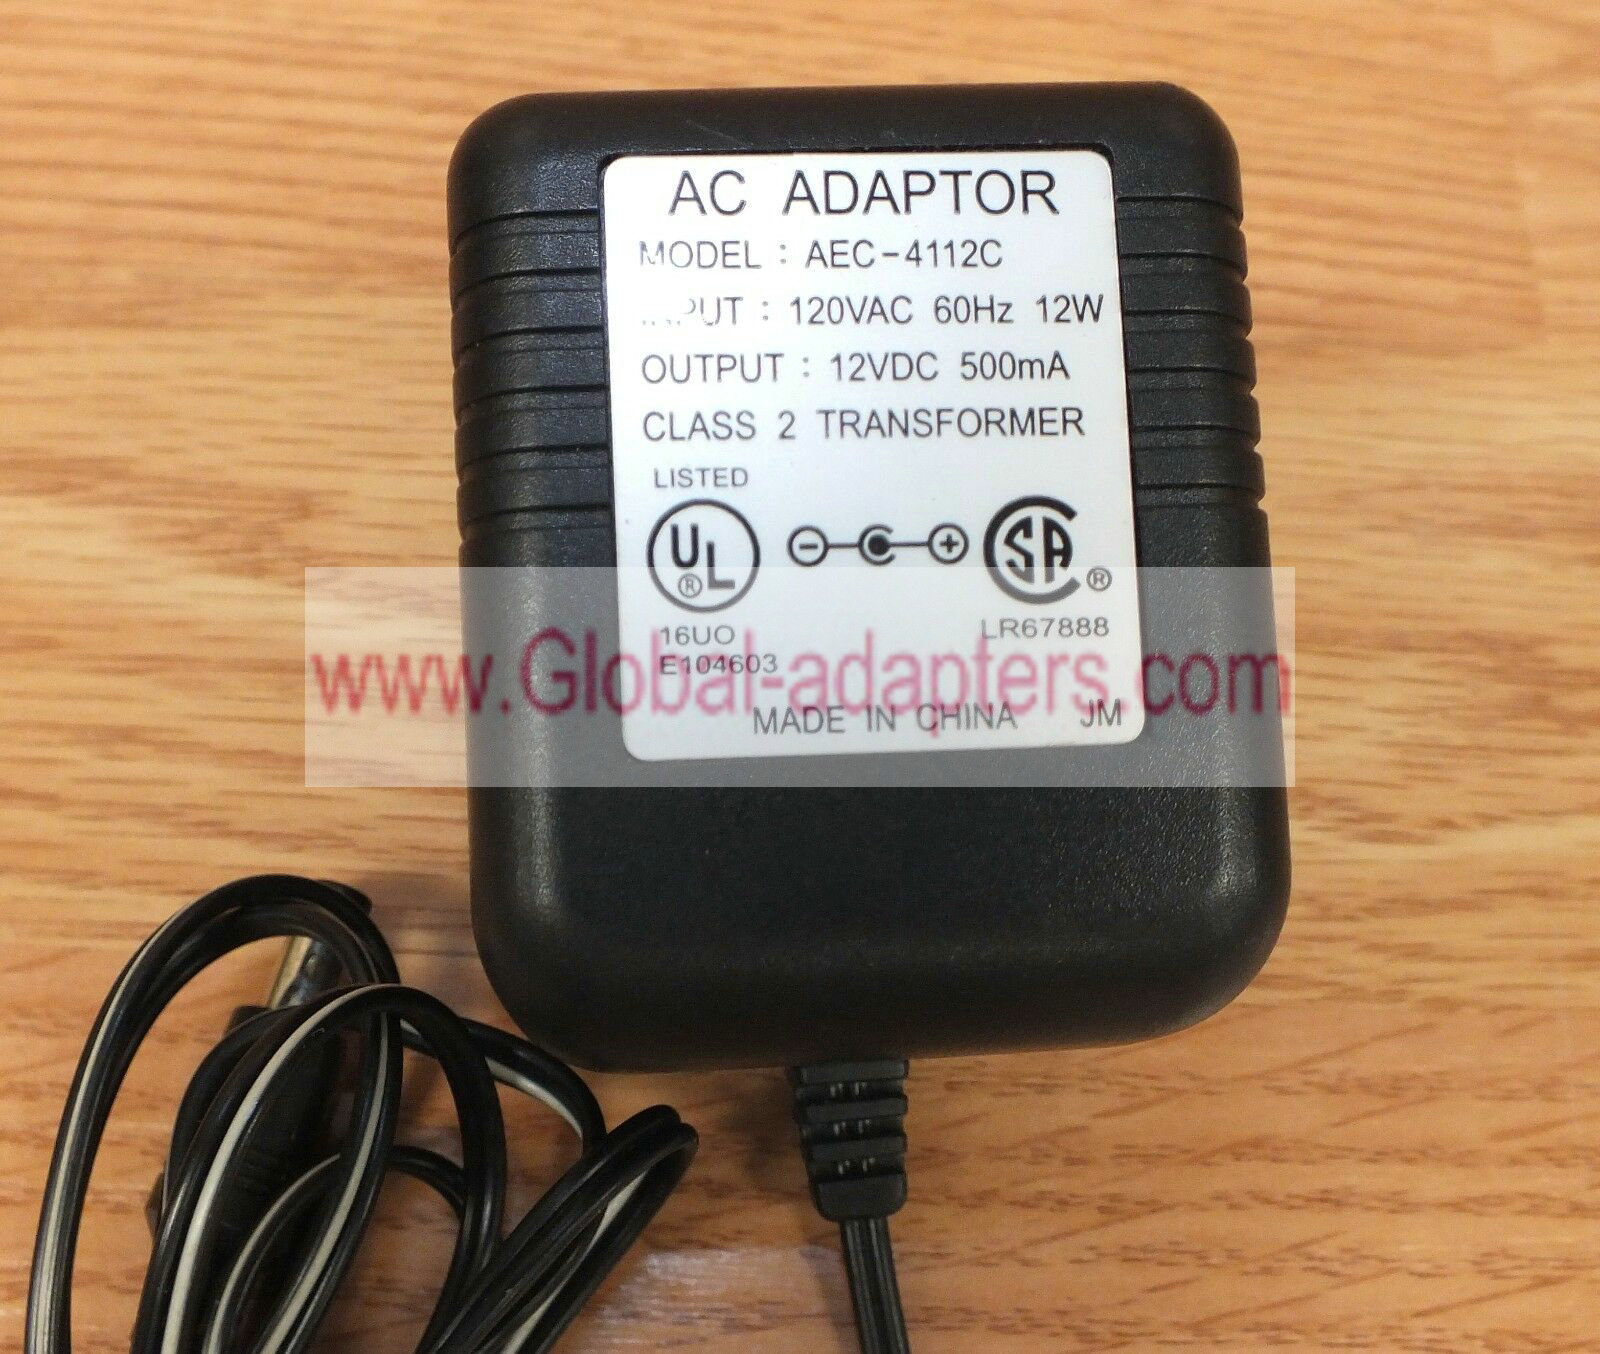 New 12V 500mA AEC-4112C AC ADAPTER FOR Bellsouth (2016) Digital Remote Answering Machine - Click Image to Close